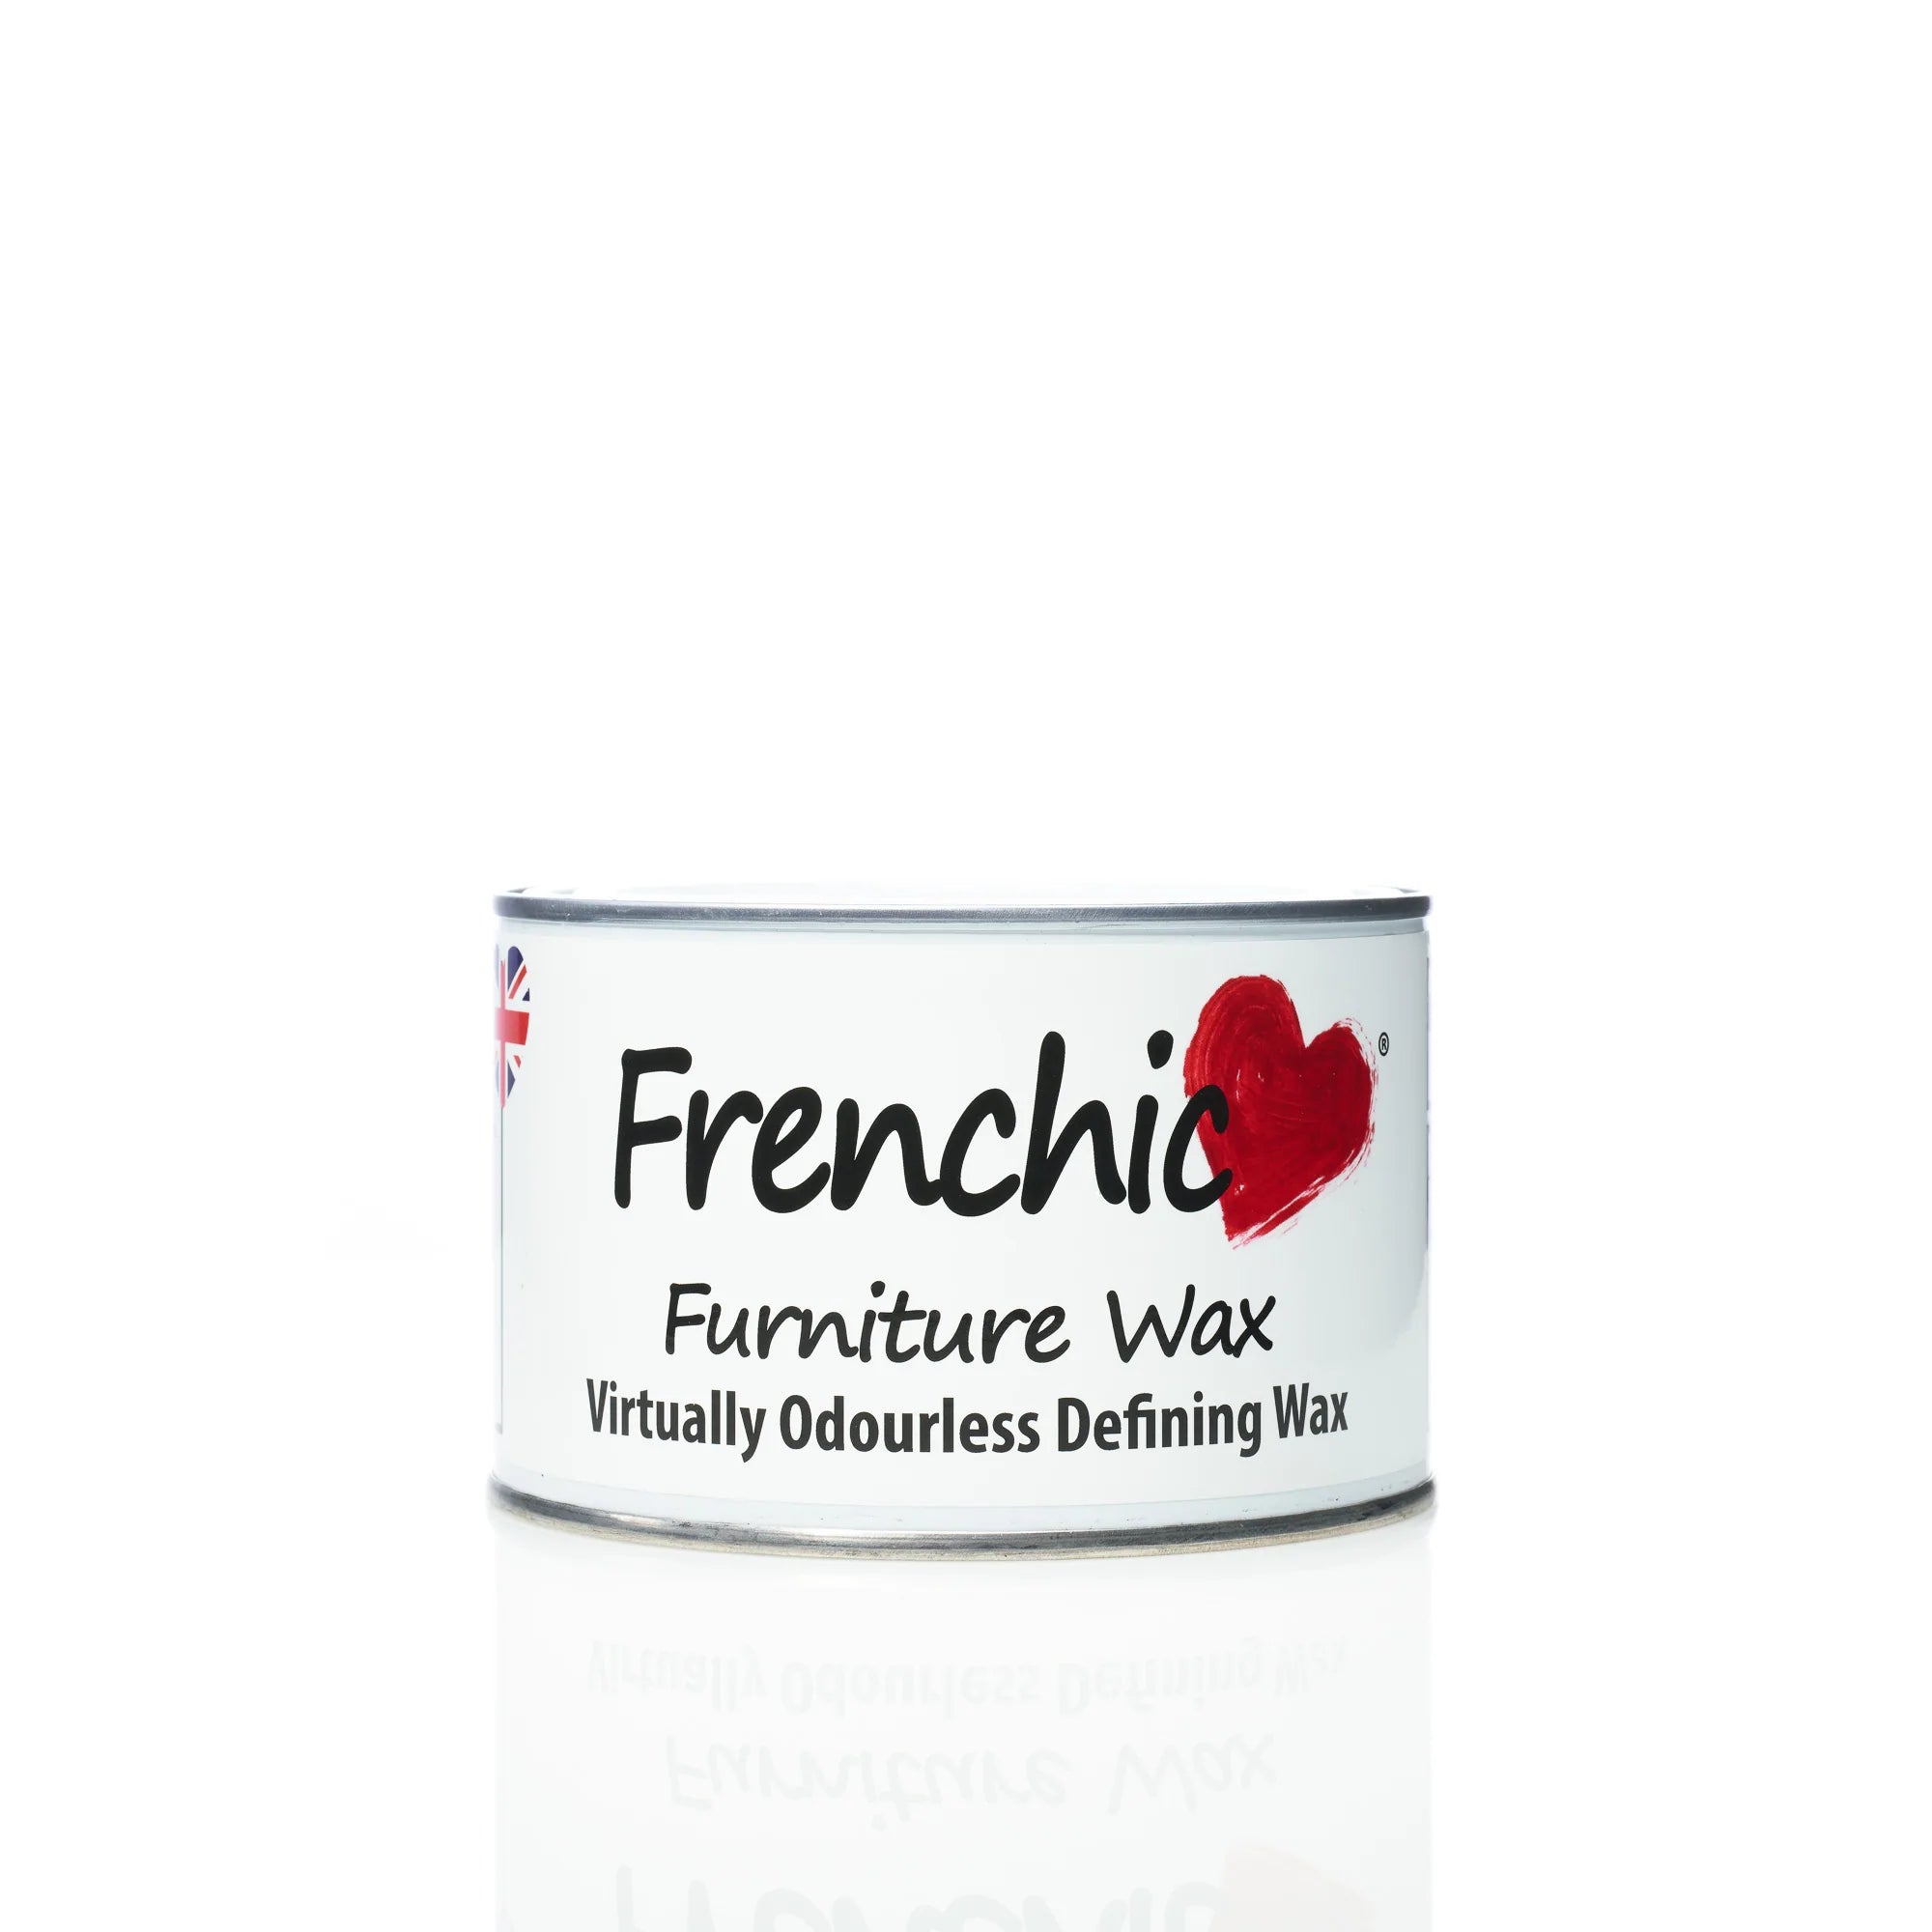 Frenchic Paint | Defining Wax by Weirs of Baggot St